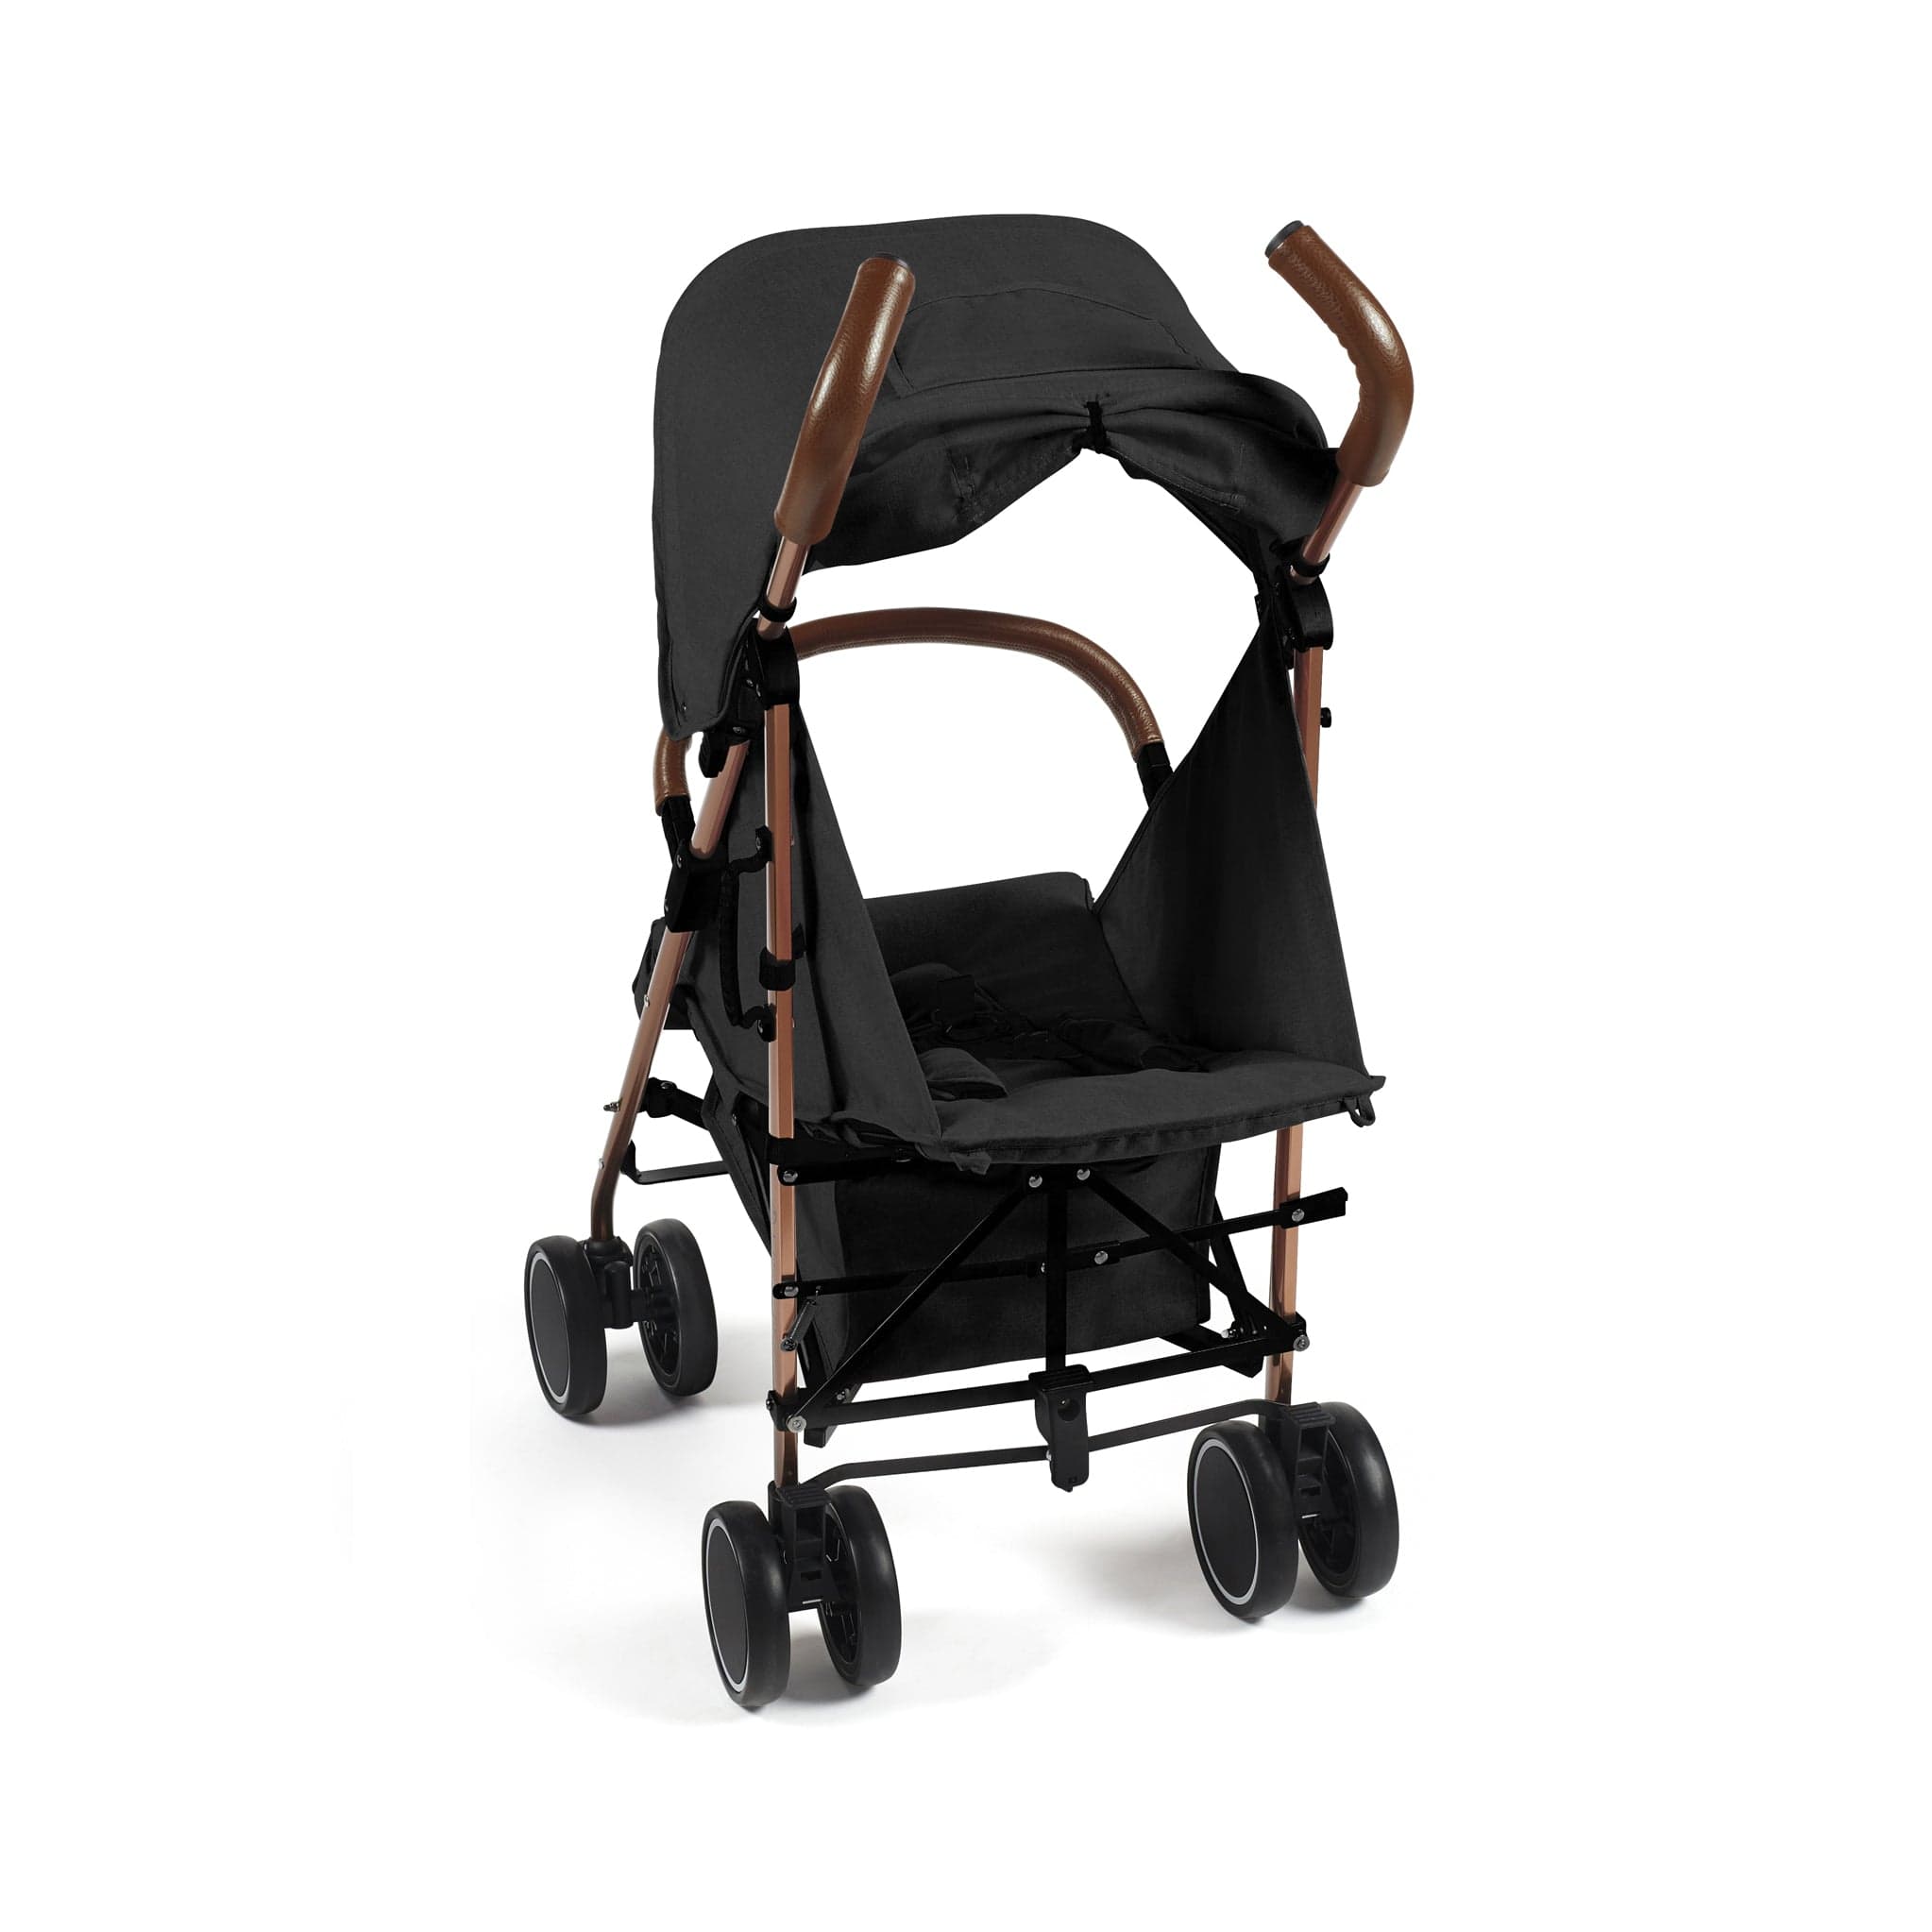 Ickle Bubba Discovery Stroller Rose Gold/Black Pushchairs & Buggies 15-002-100-043 0700355999355